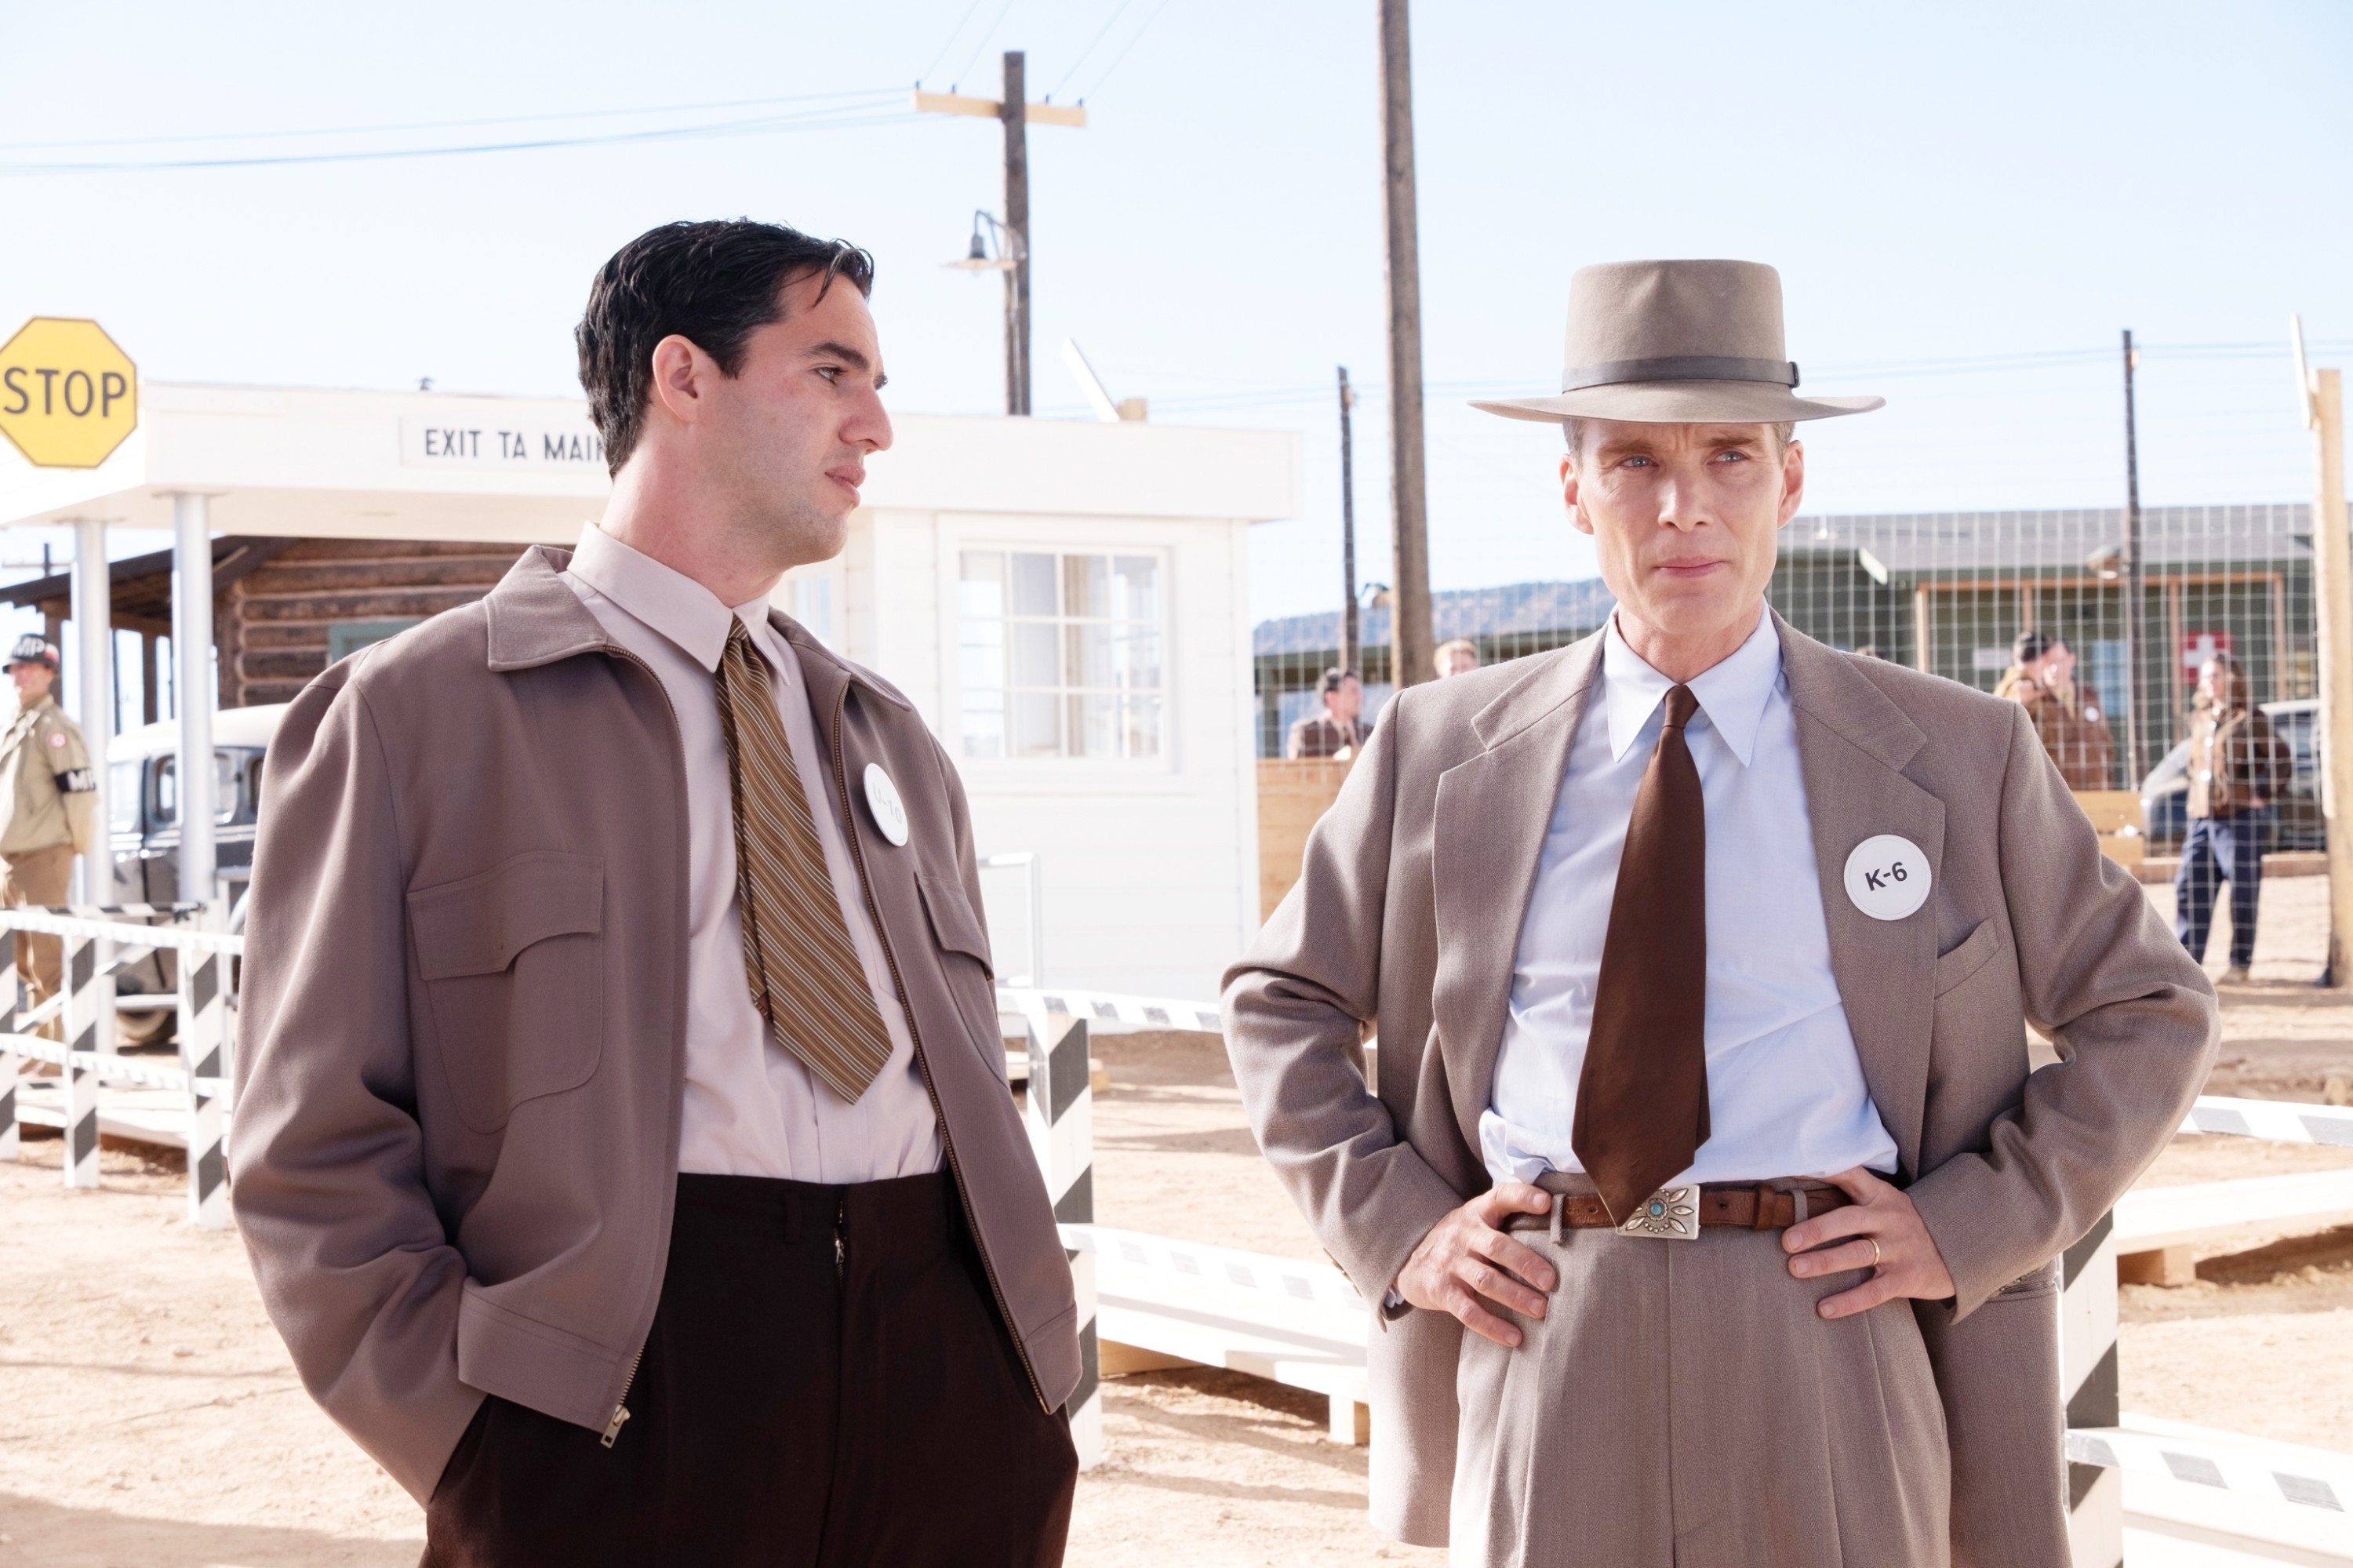 Cillian Murphy as Oppenheimer stands next to Benny Safdie as Edward Teller in an outdoor setting with a &quot;STOP&quot; sign and buildings behind them